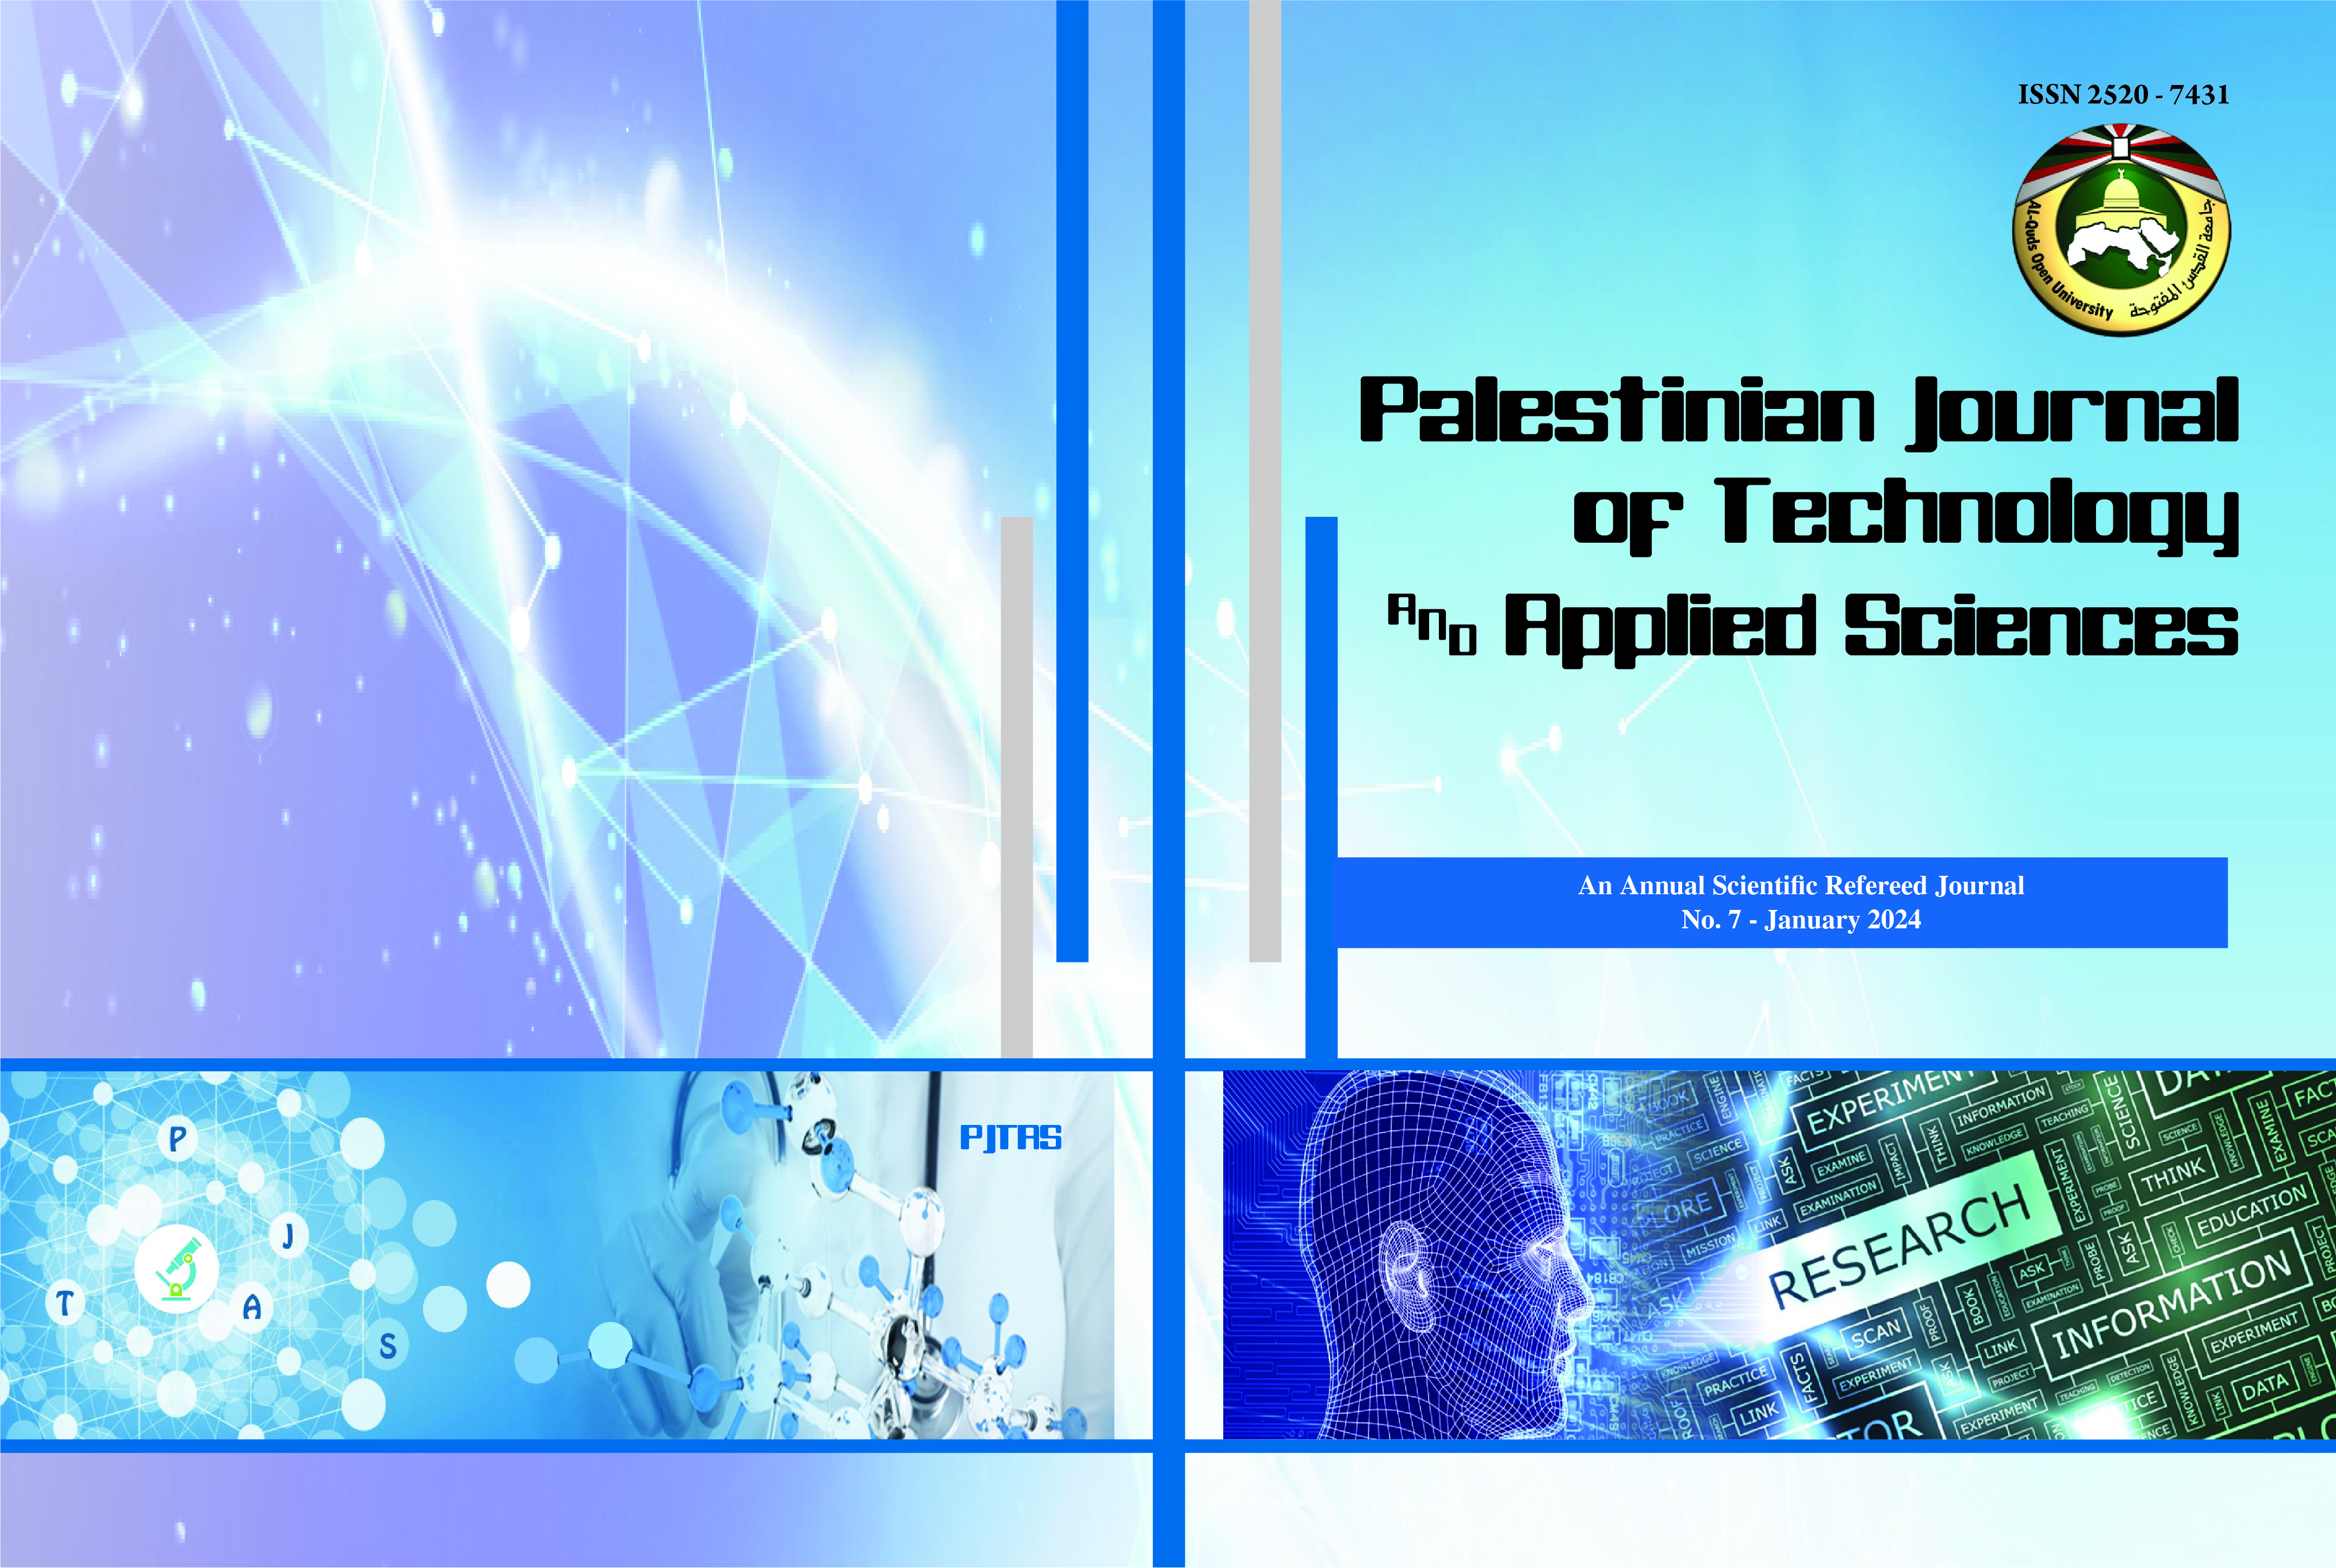 					View Vol. 1 No. 7 (2024): Palestinian Journal of Technology and Applied Sciences
				